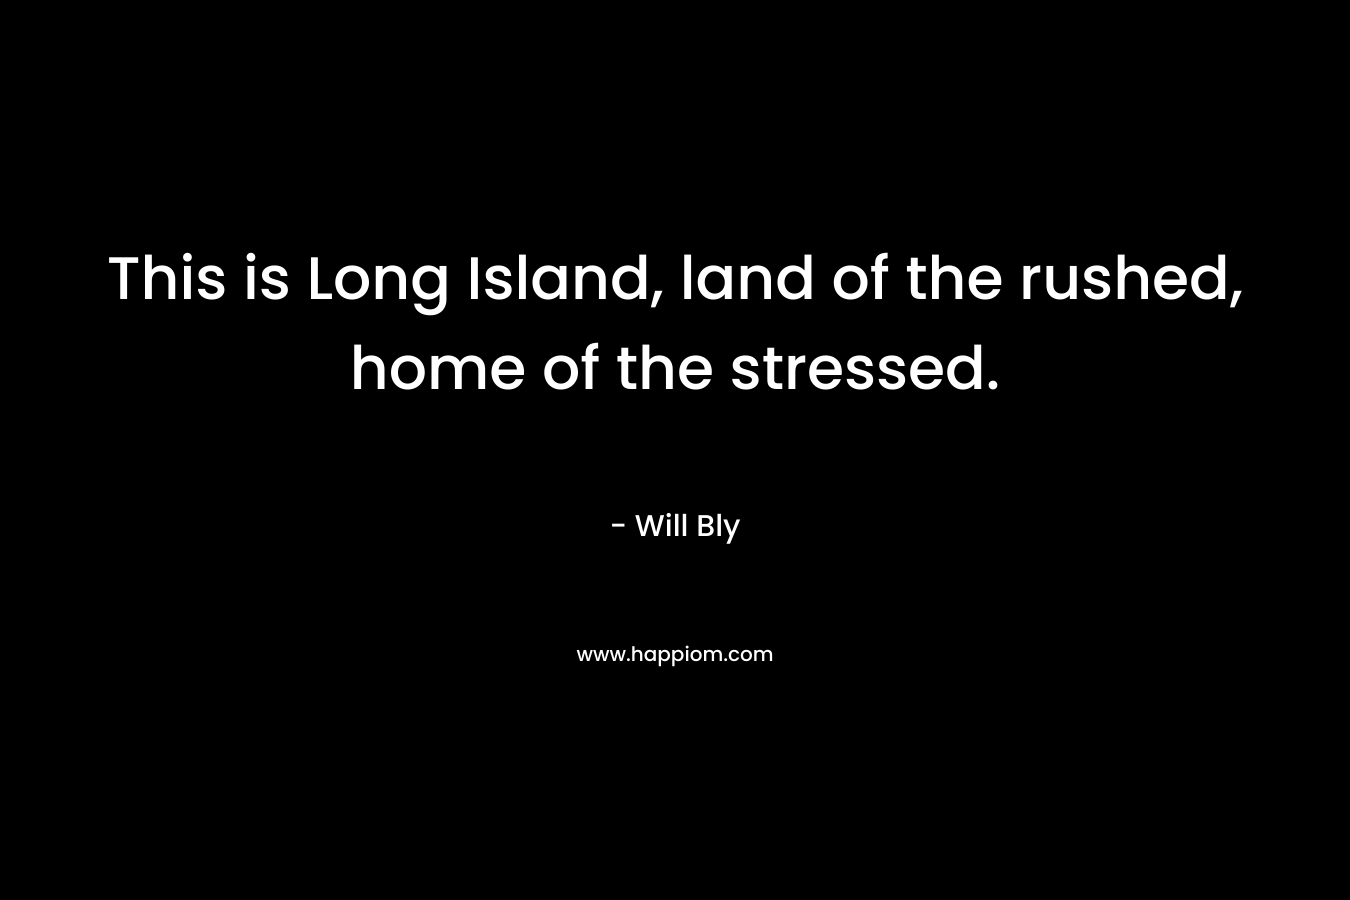 This is Long Island, land of the rushed, home of the stressed. – Will Bly